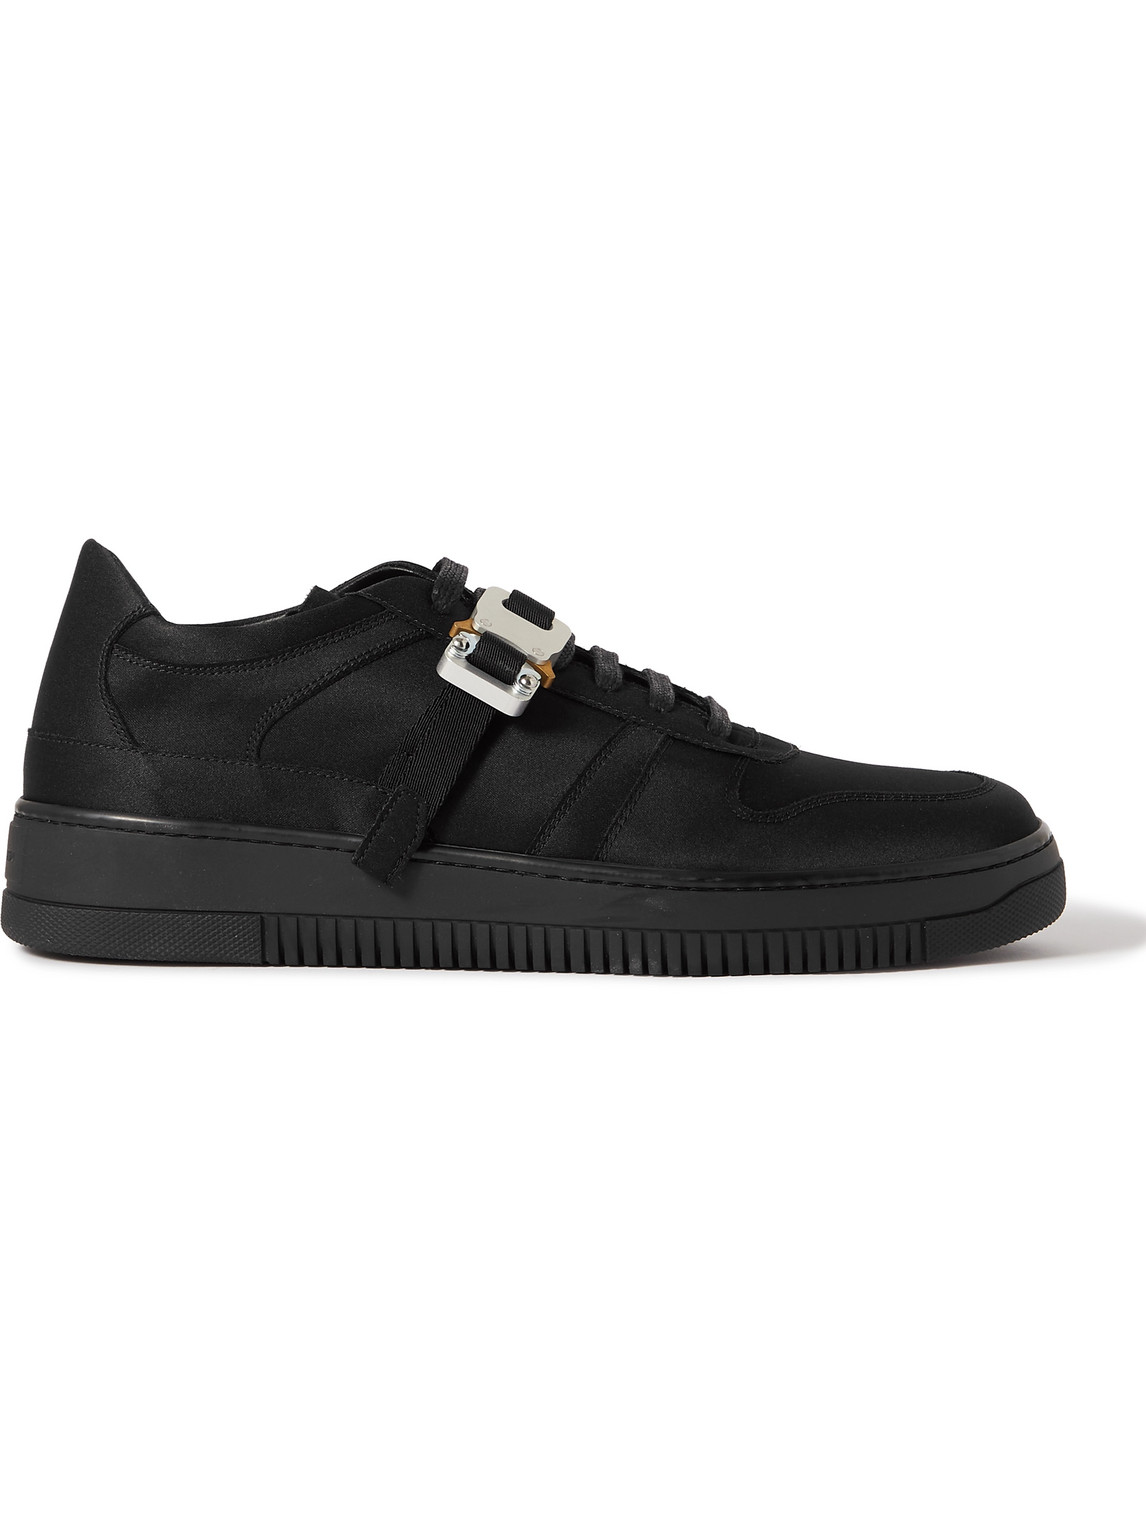 Alyx Leathers BUCKLE-EMBELLISHED SATIN SNEAKERS